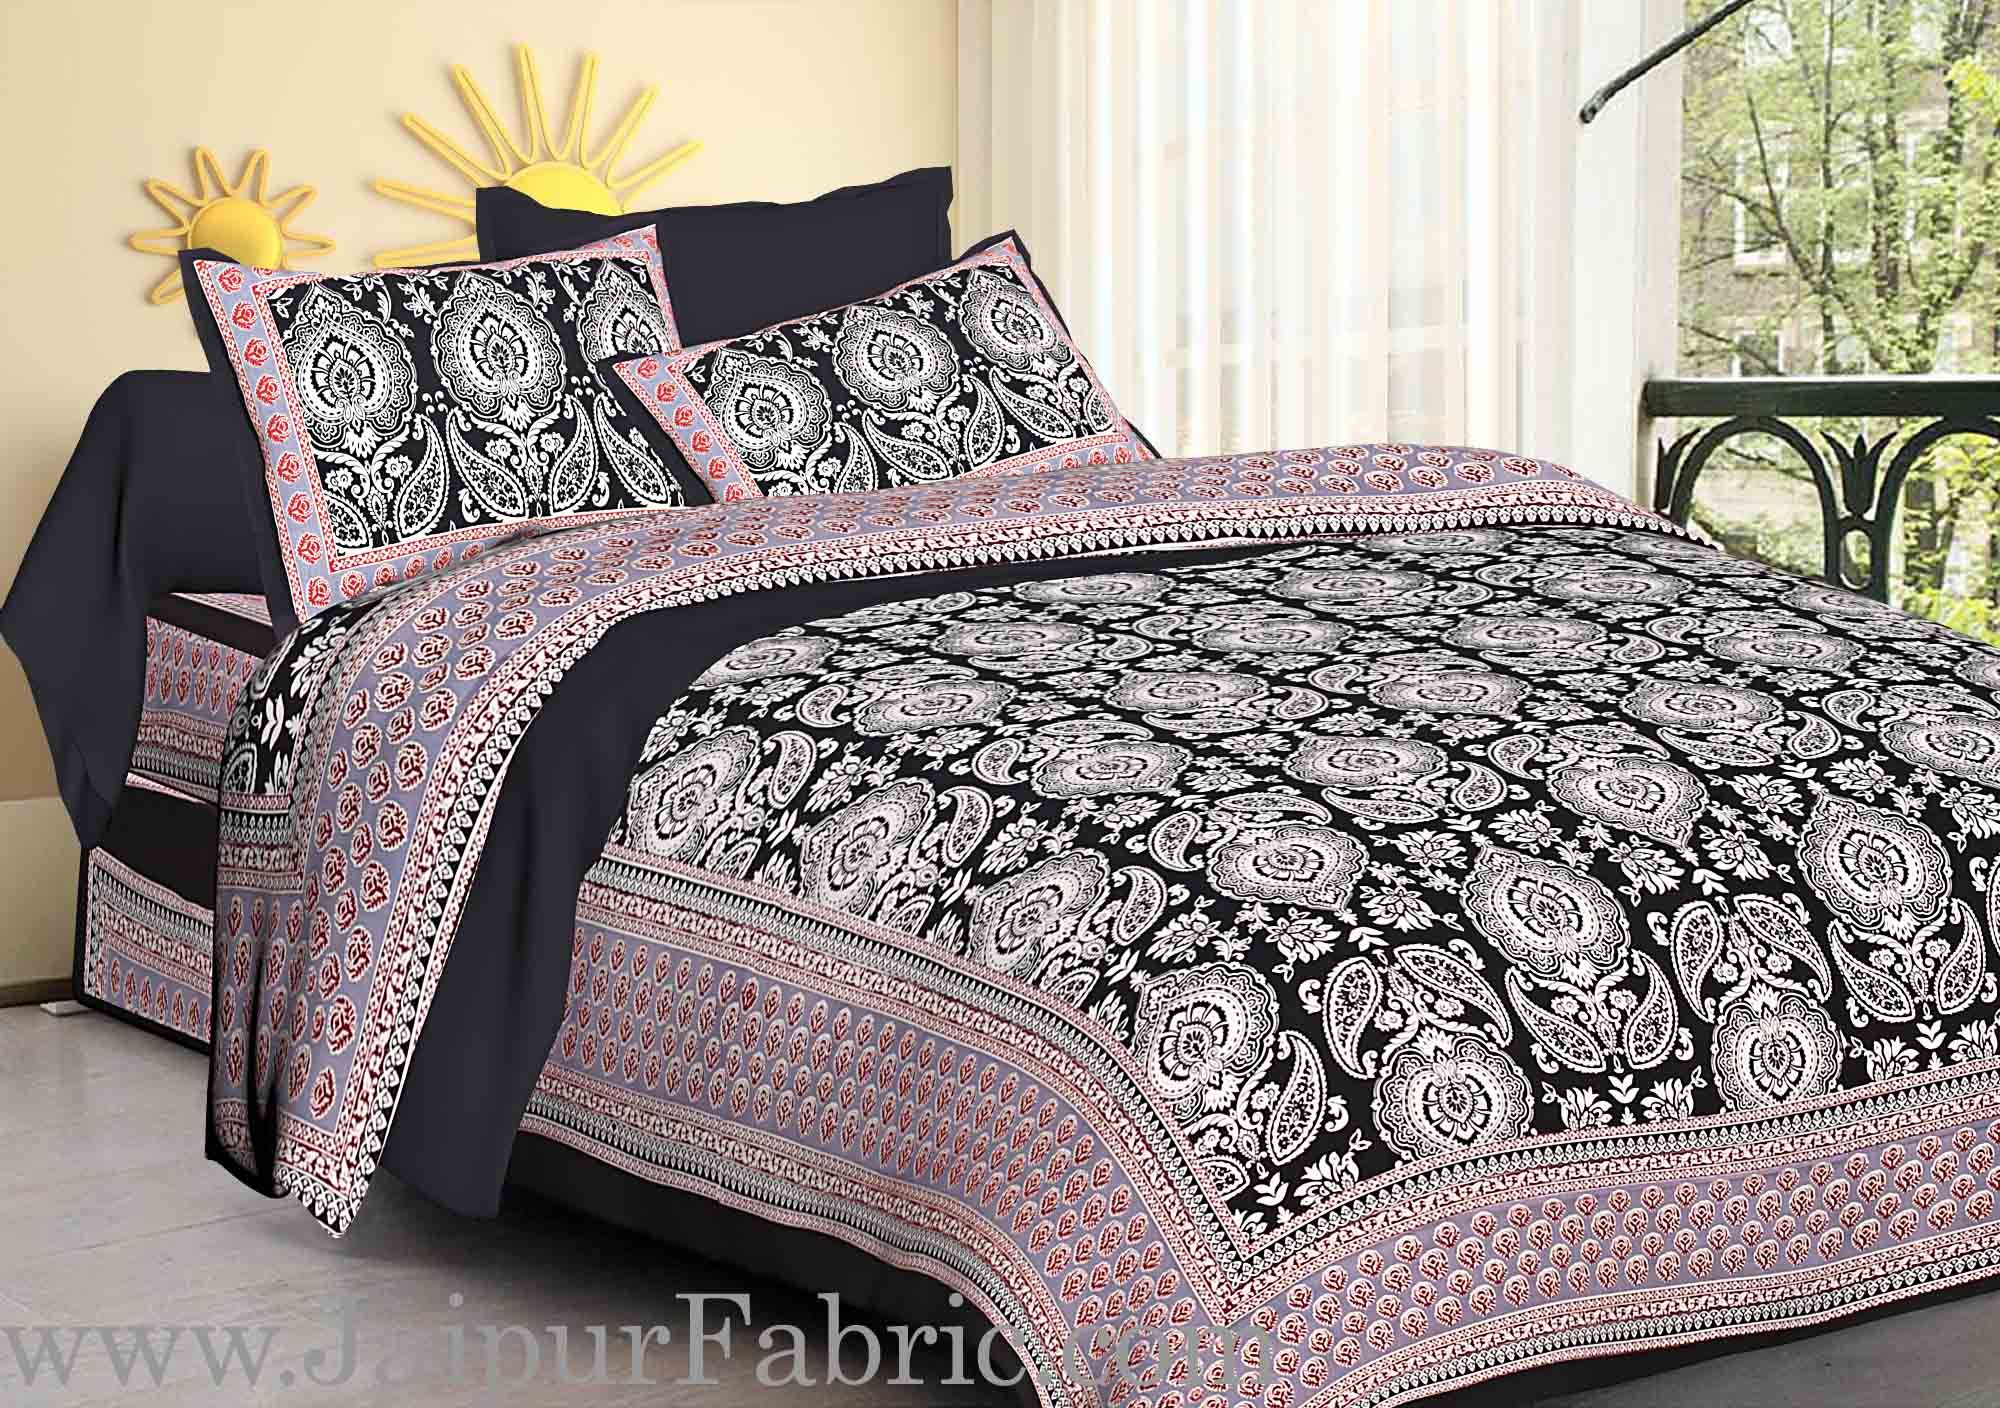 Black  Border Large Booty Print Cotton Double Bed Sheet